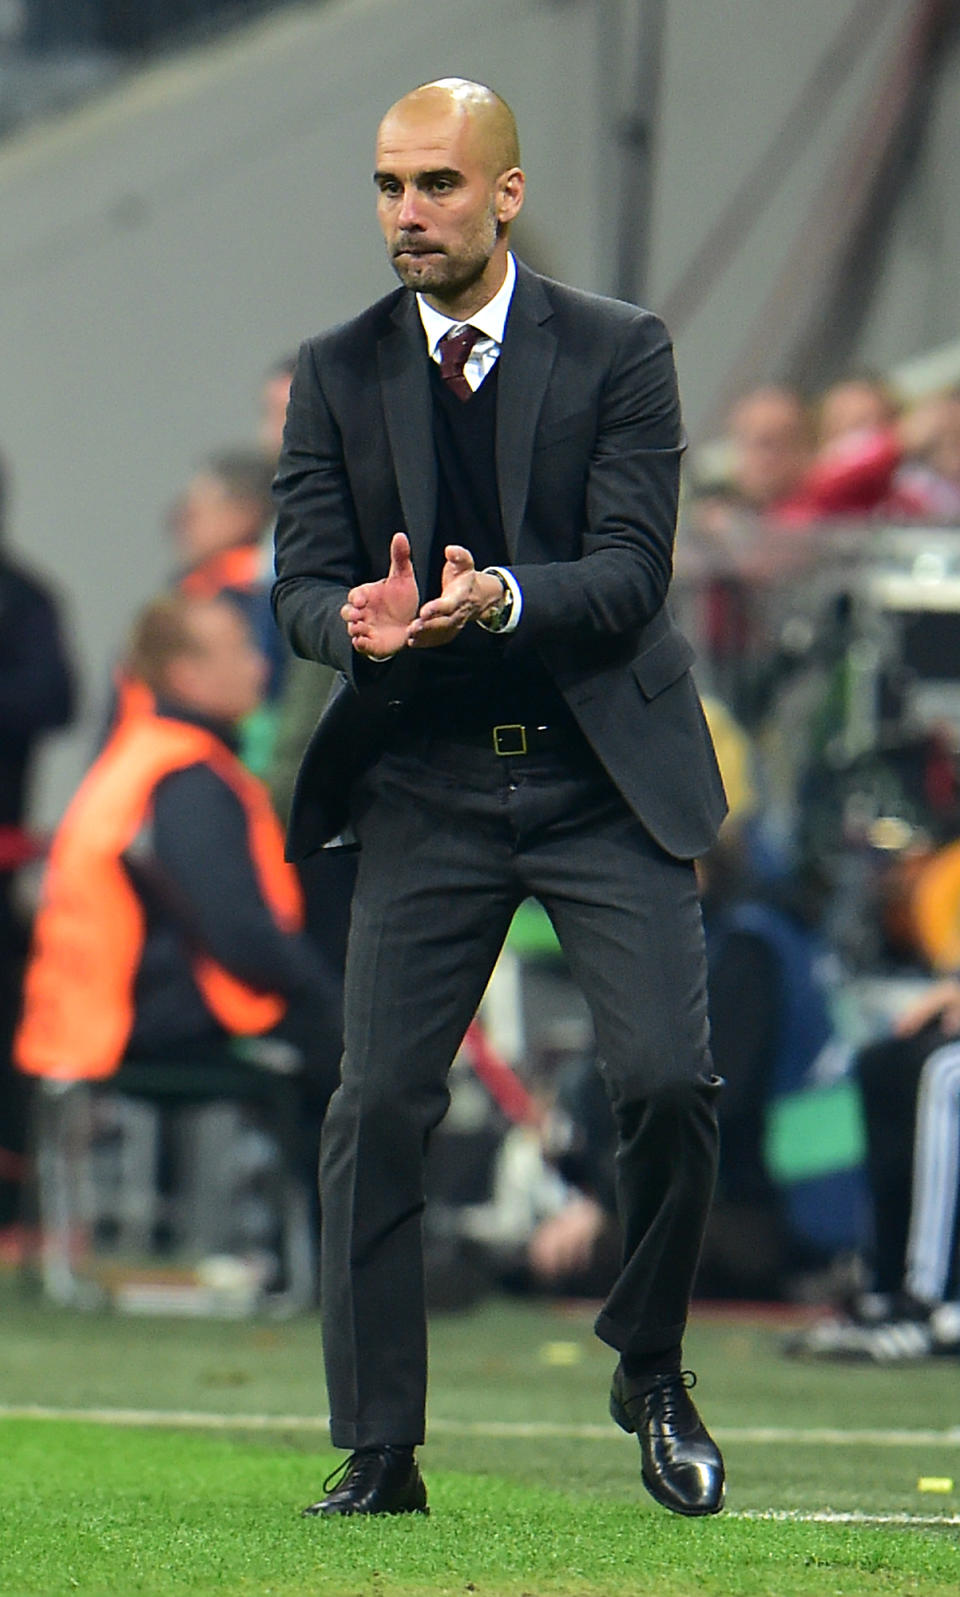 Bayern head coach Pep Guardiola of Spain applauds during the Champions League quarterfinal second leg soccer match between Bayern Munich and Manchester United in the Allianz Arena in Munich, Germany, Wednesday, April 9, 2014. Munich defeated Manchester by 3:1. (AP Photo/Kerstin Joensson)